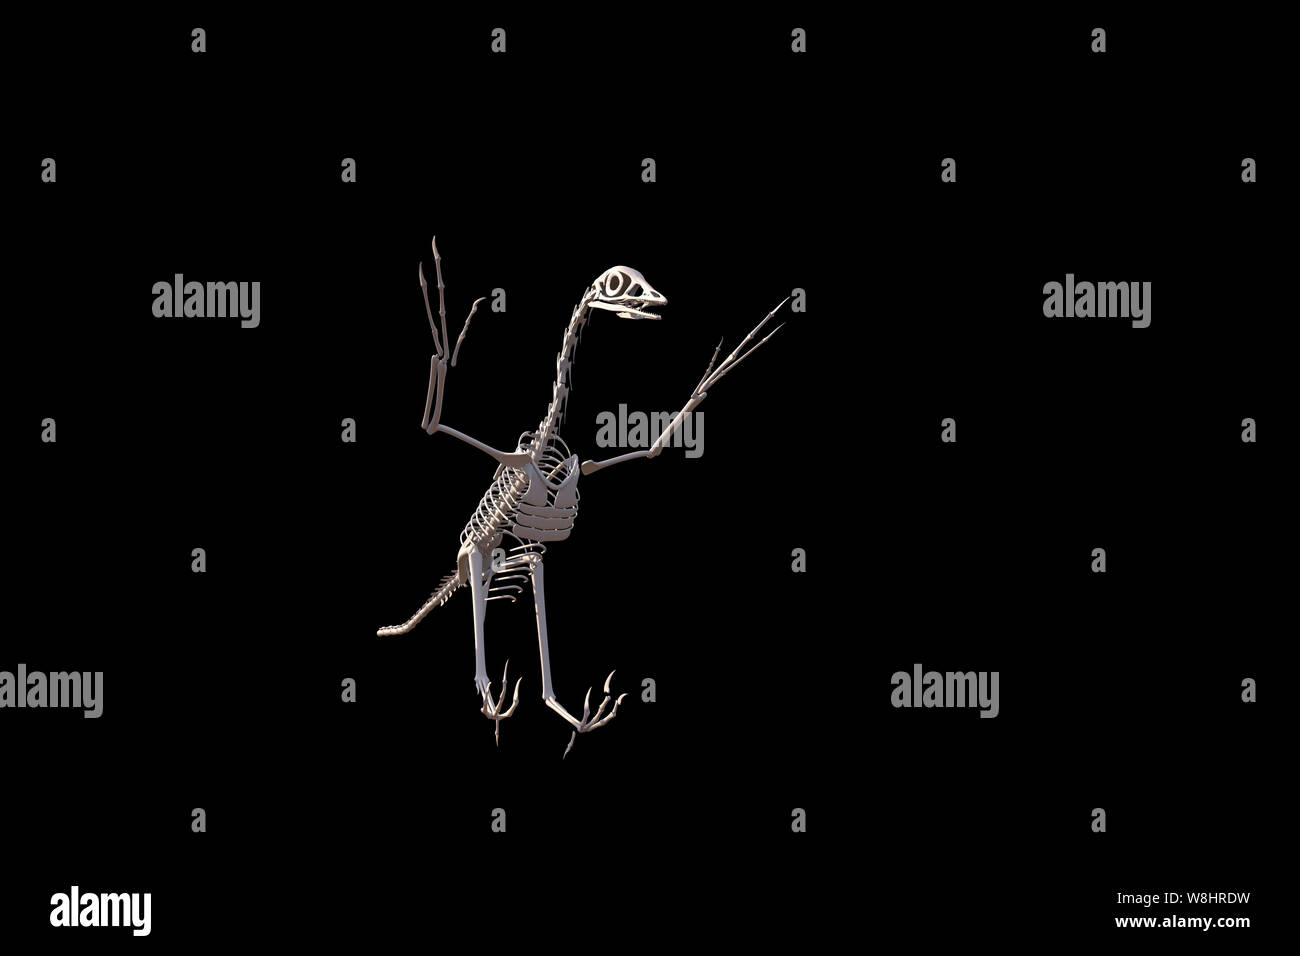 Archaeopteryx dinosaur skeletal structure against black background, illustration. These bird like dinosaurs lived about 150 million years ago during the late Jurassic period. Stock Photo